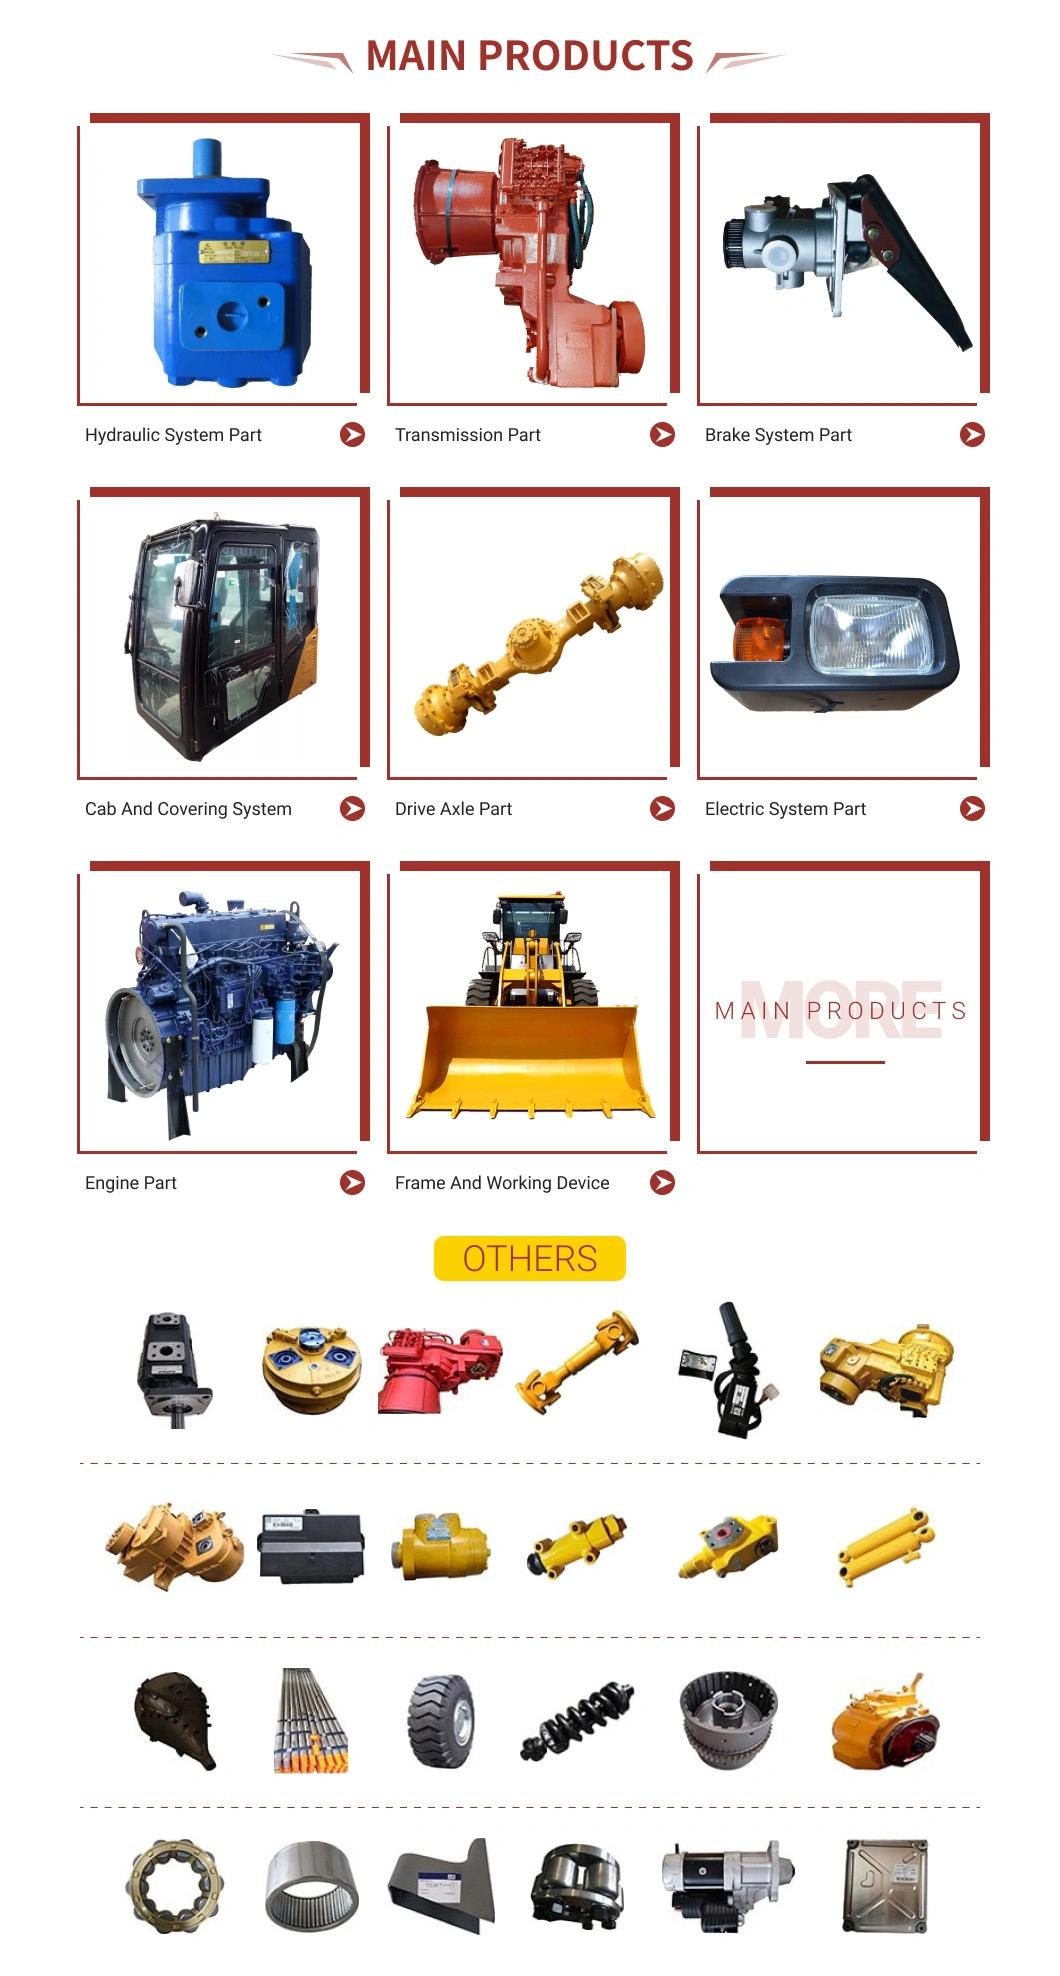 High-End Product High Quality Gear Pump for Sale with CE Certificate